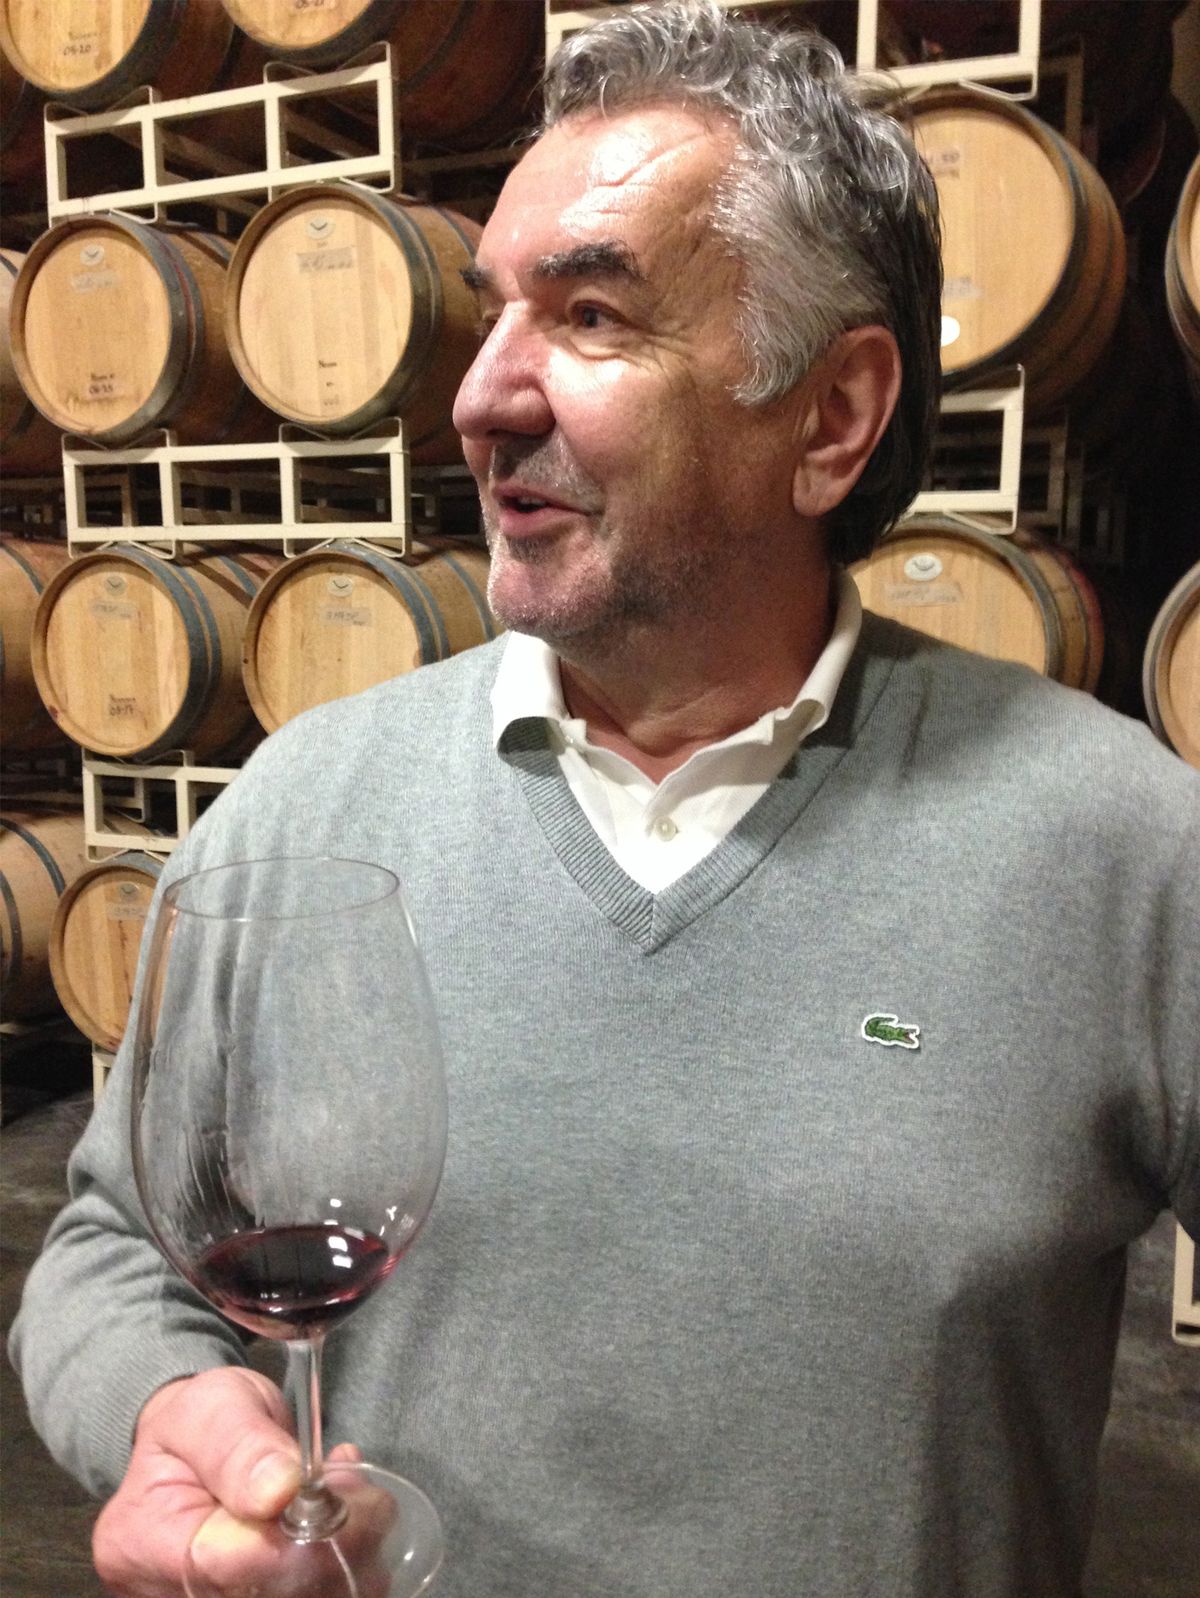 Jean Claude Beck, who grew up in the Alsace region of France, is the winemaker for Woodhouse Wine Estates in Woodinville, Wash. (Andy Perdue photos)